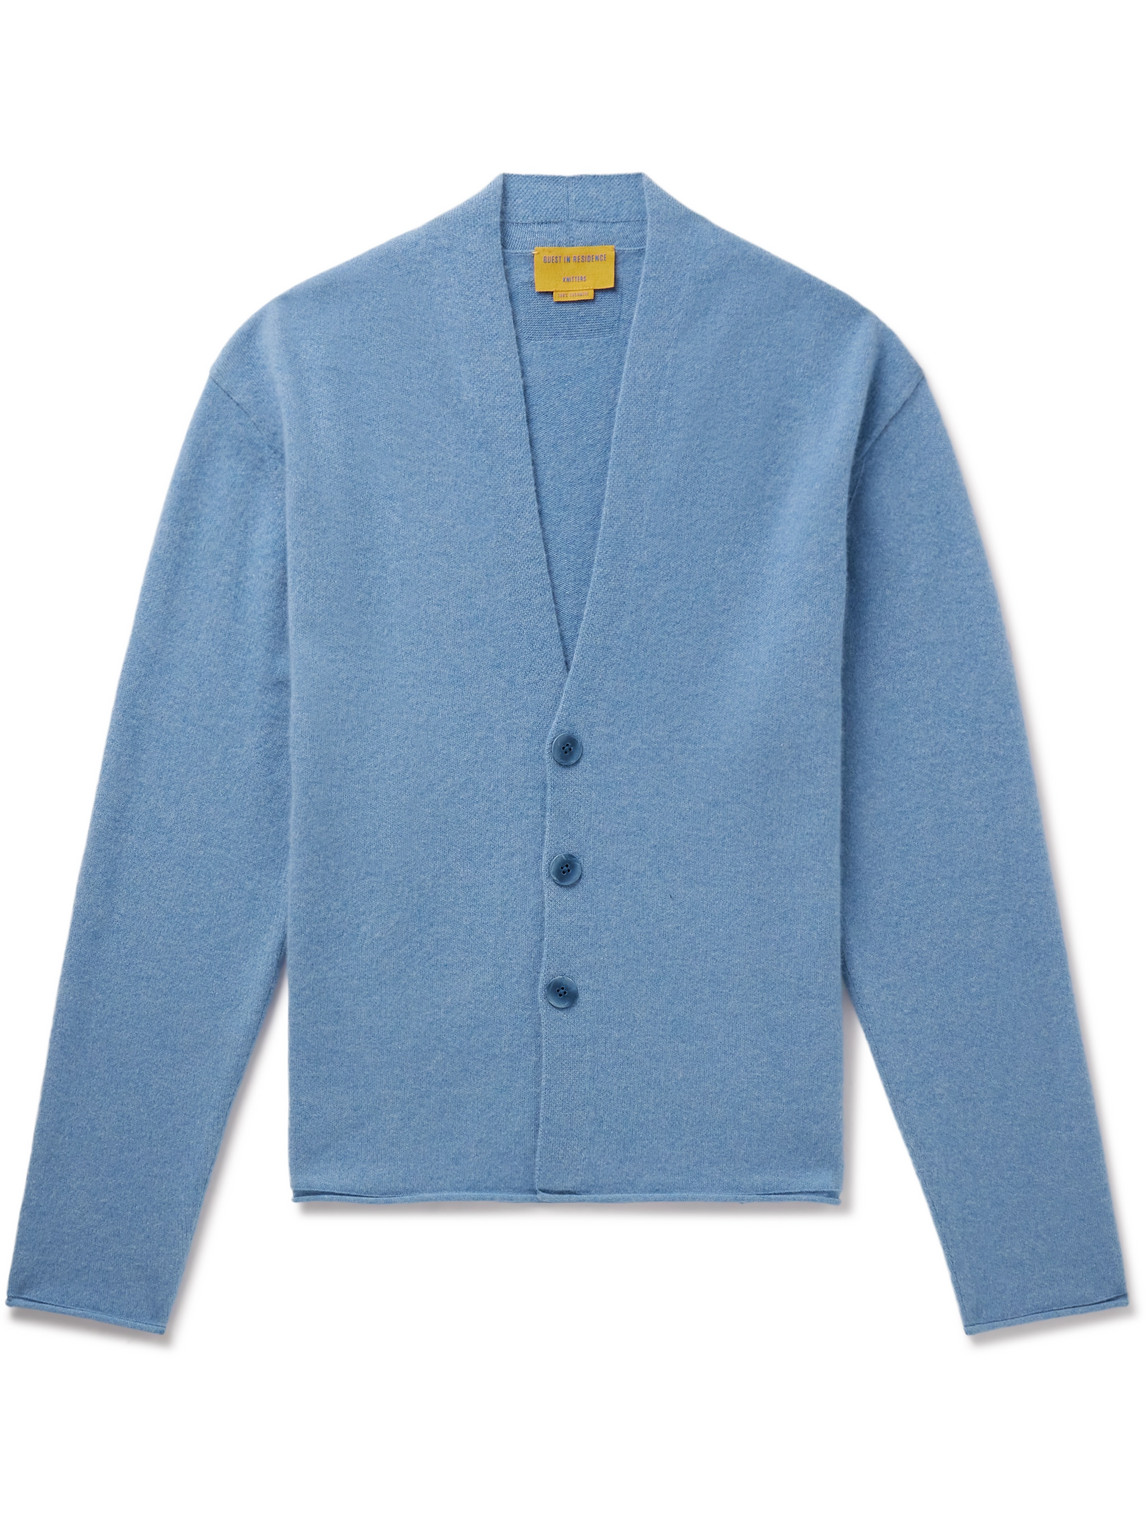 Guest In Residence - Everywear Cashmere Cardigan - Men - Blue - L von Guest In Residence